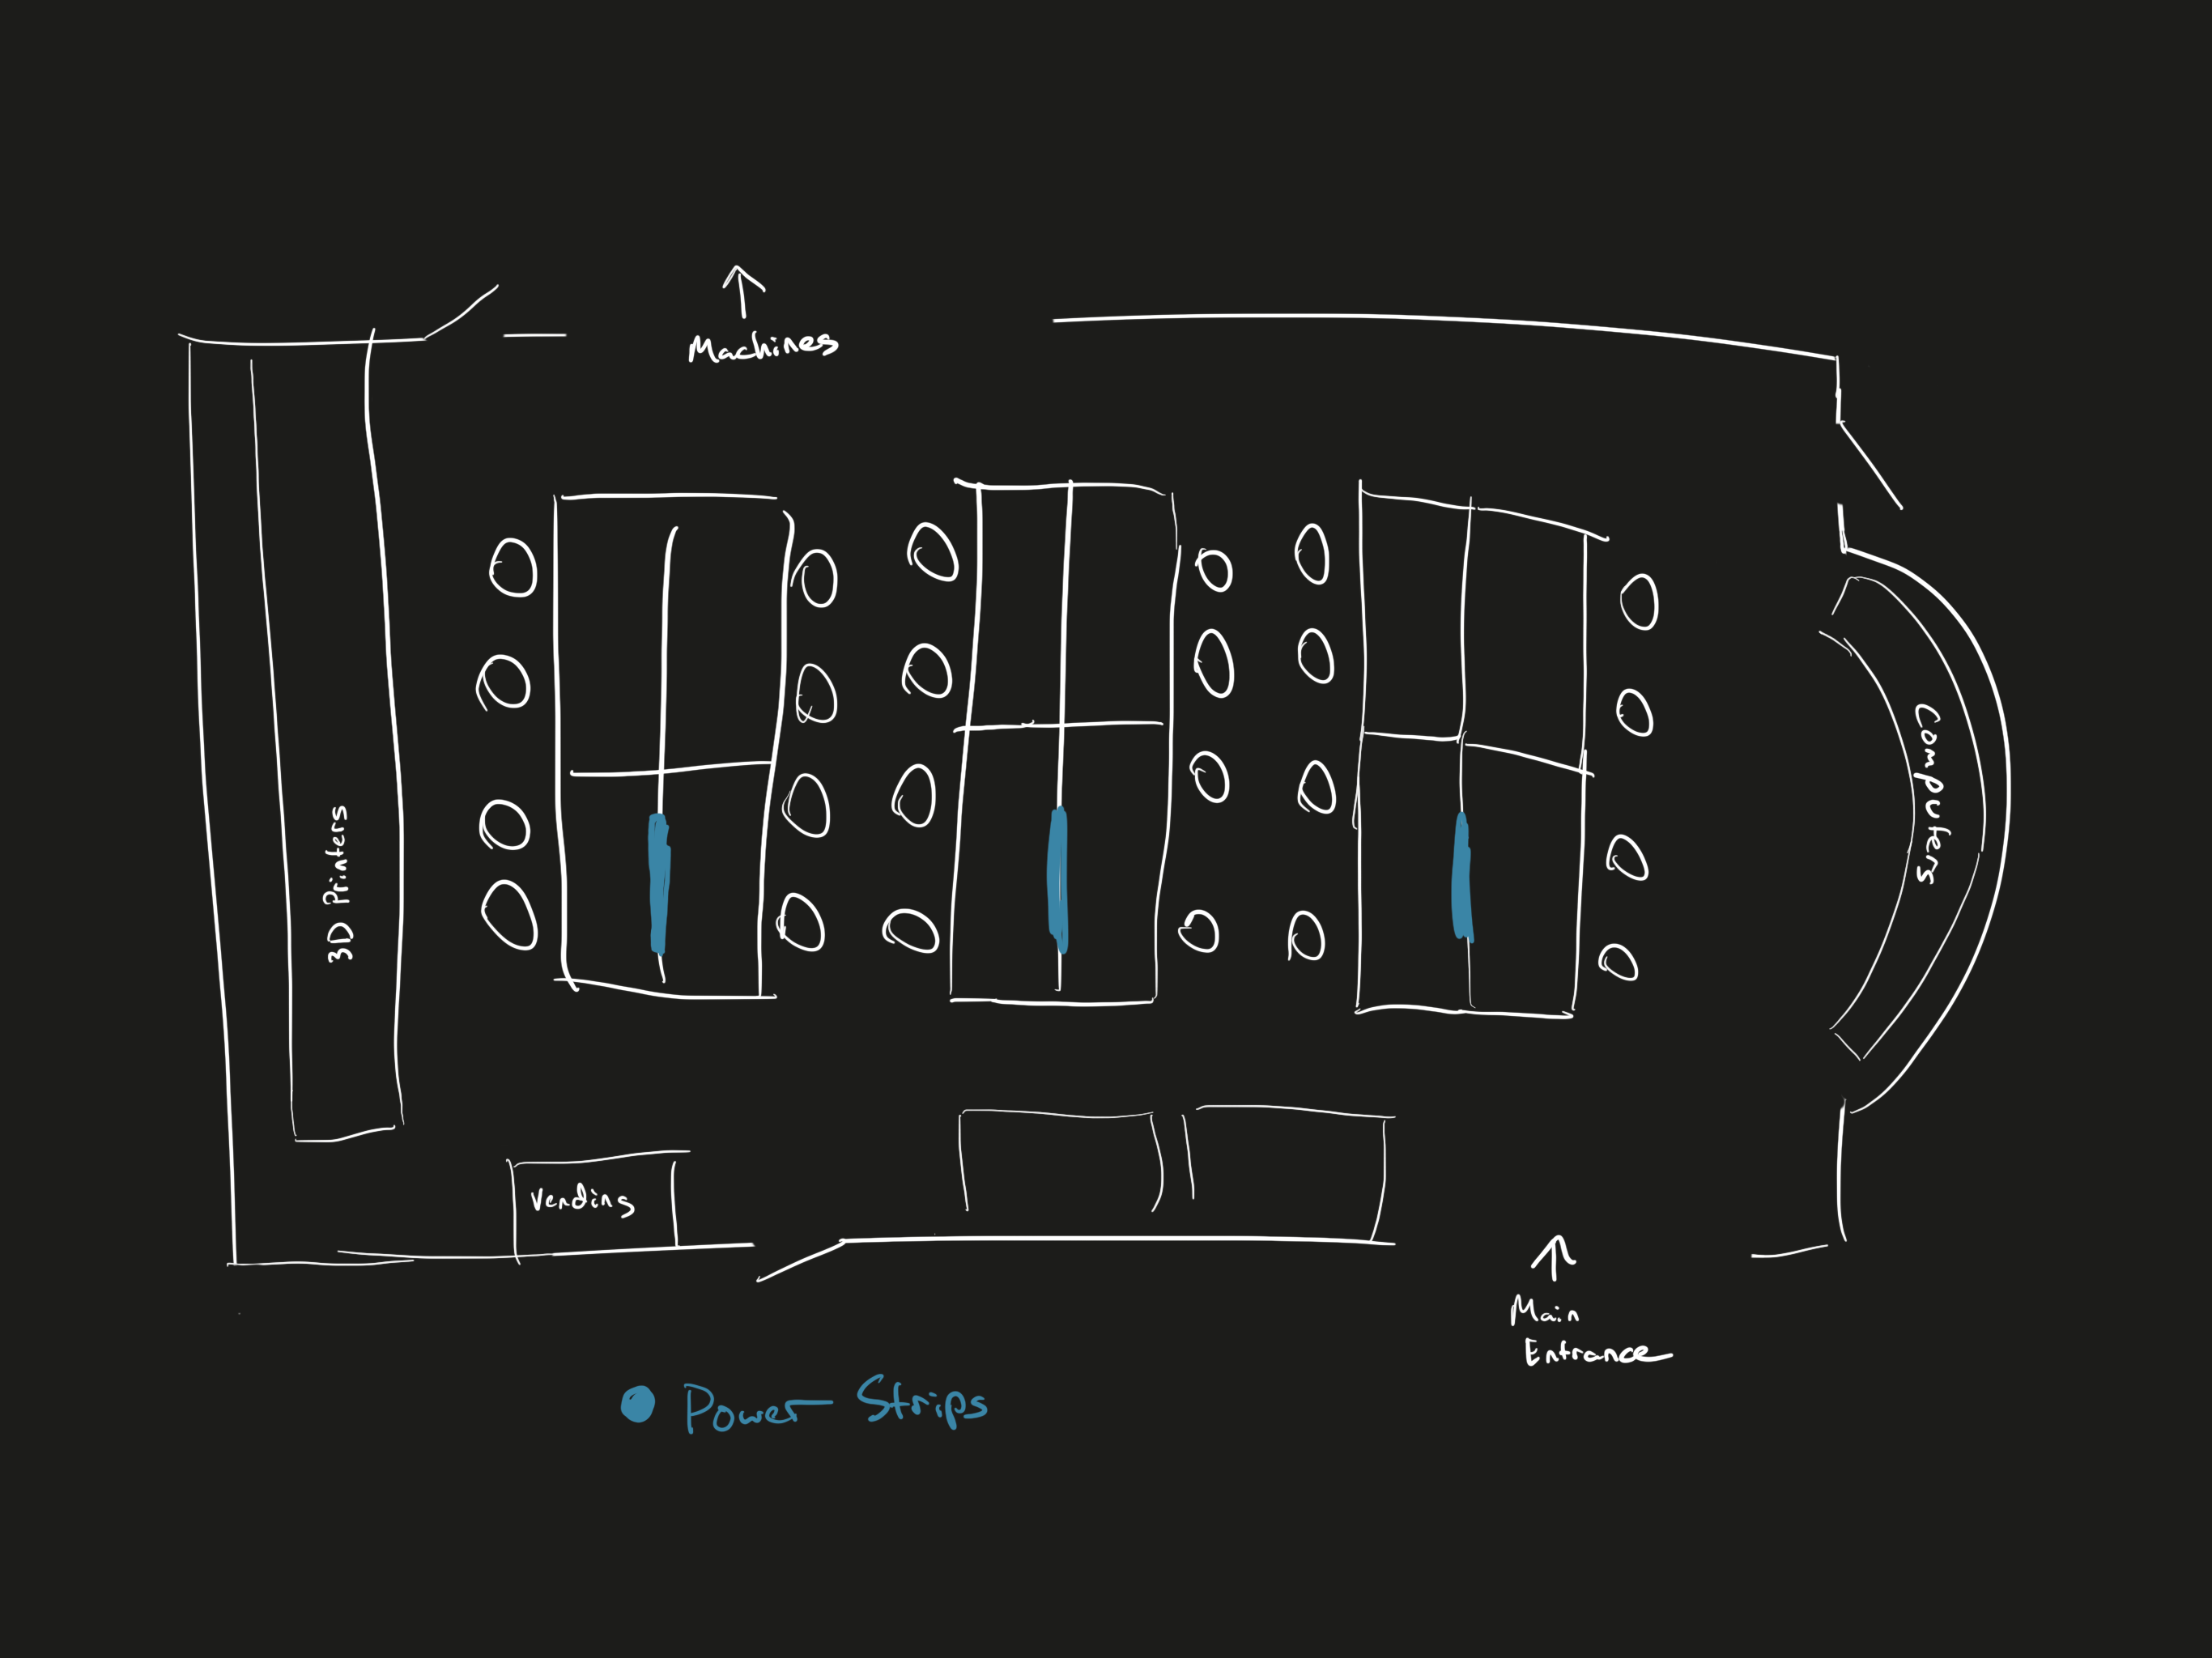 a digital sketch of the rough layout of the maker space indicating where the power strips are located